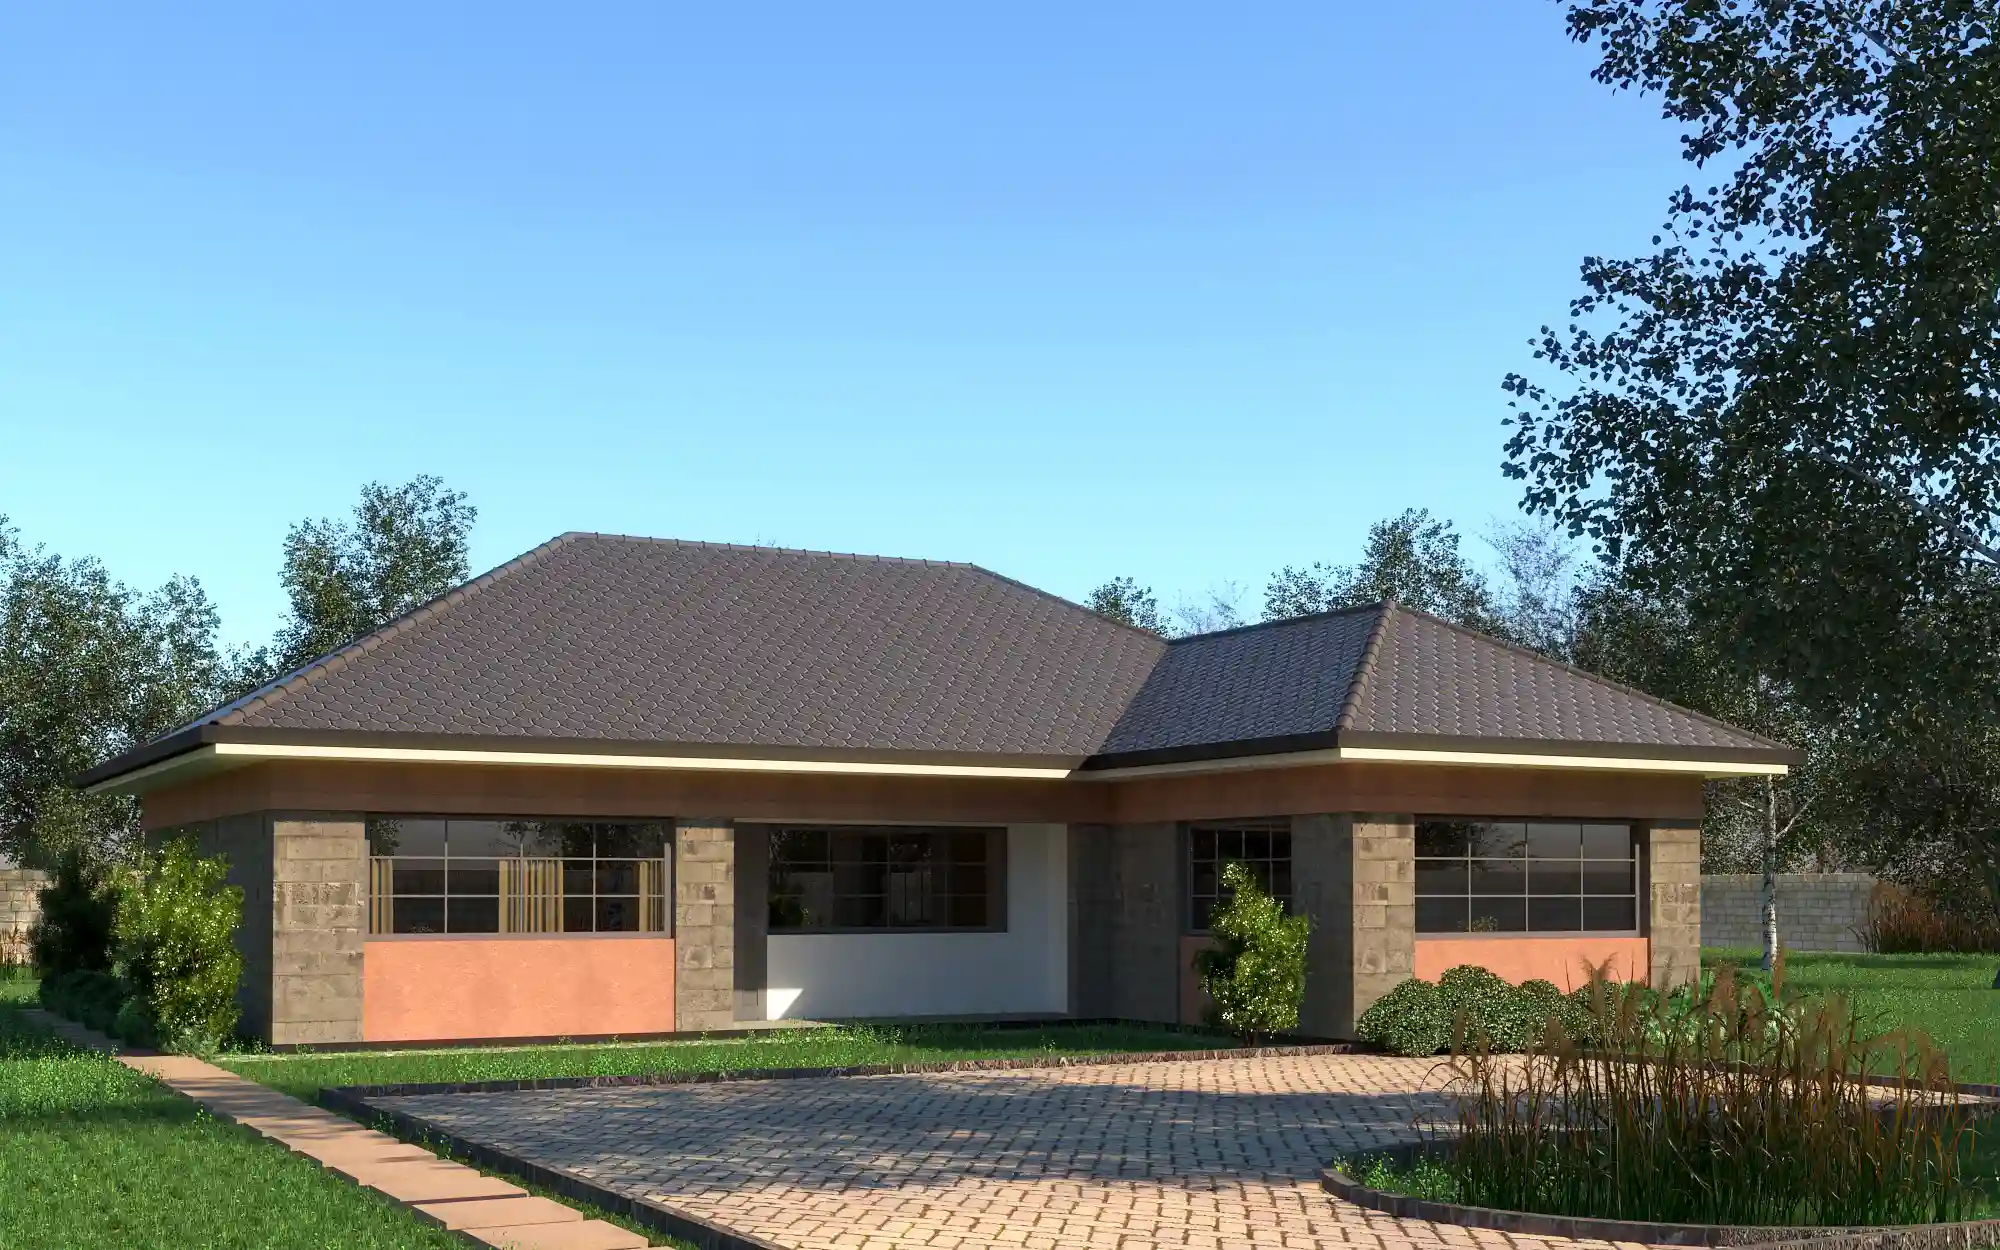 4 Bedroom Jenga Pole Pole Bungalow - ID 4171 - Phase 4 Front 4171 from Inuua Tujenge house plans with 4 bedrooms and 2 bathrooms. ( jengapolepole )